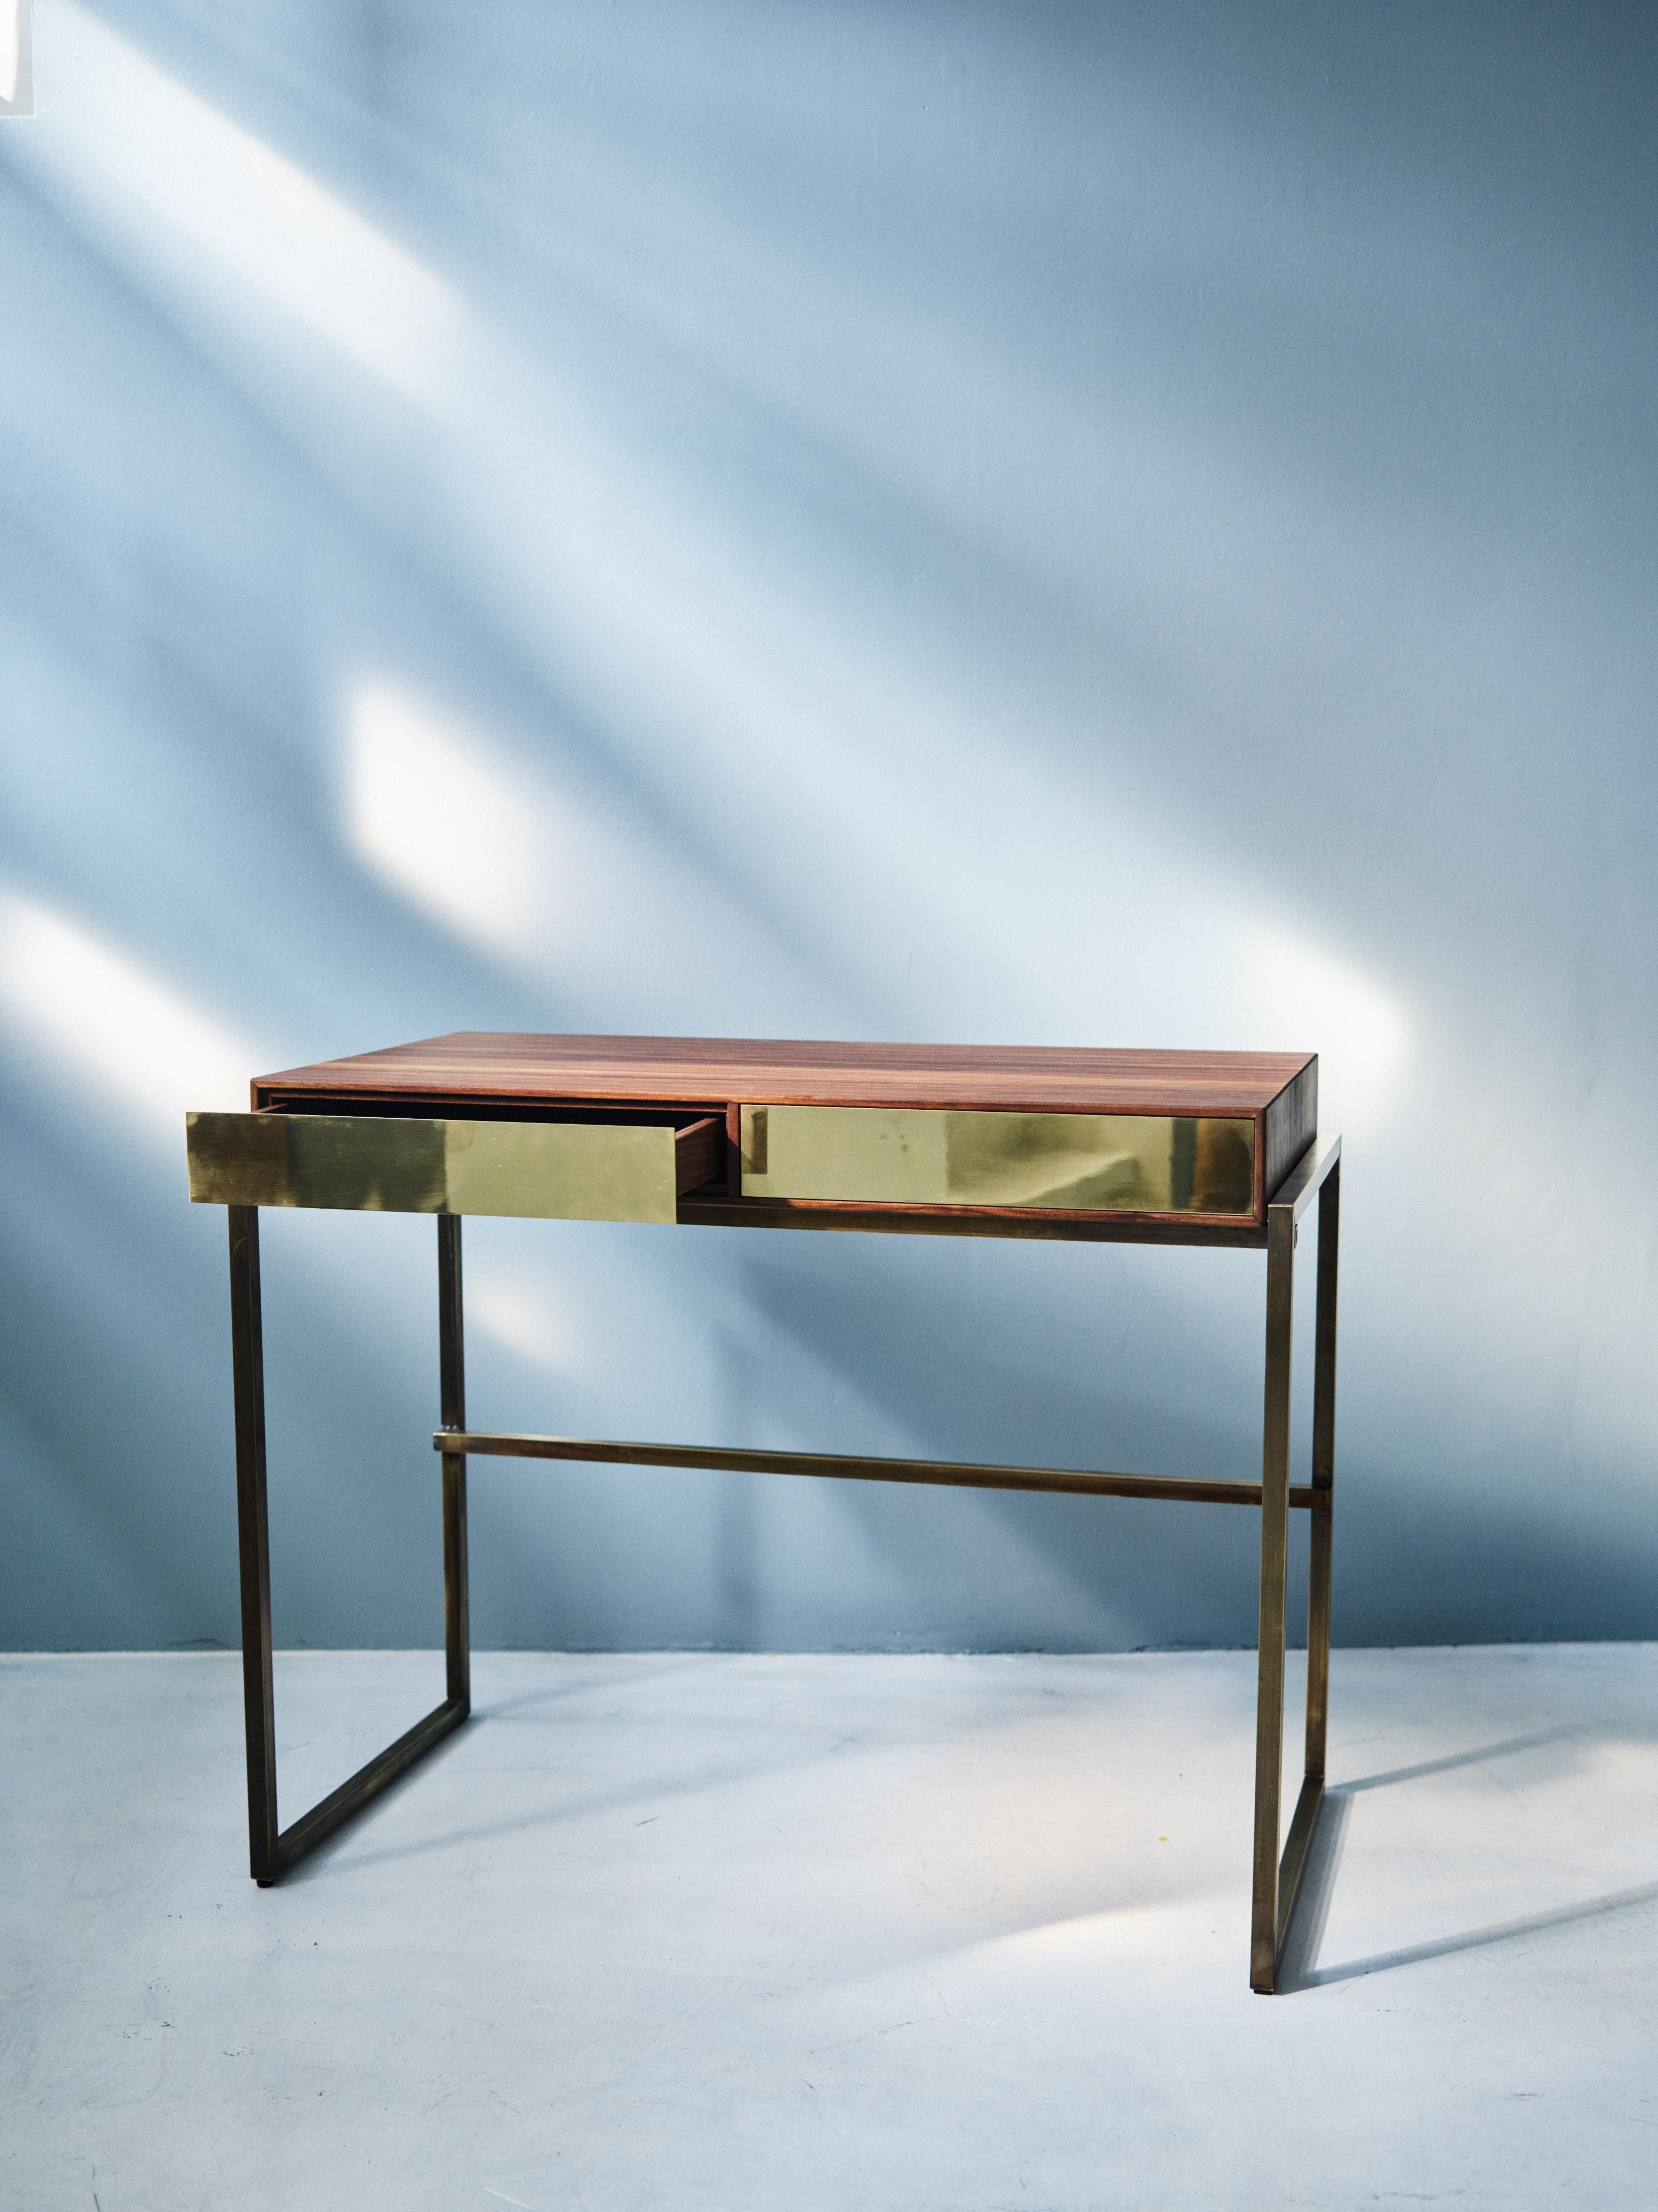 This modern minimalist Mila T73B writing desk was designed by Peter Ghyczy in 2017 and hand-crafted in the GHYCZY atelier in the South of the Netherlands. The 'Mila' desk features a thin minimalist frame of aged brass that has been casted to form